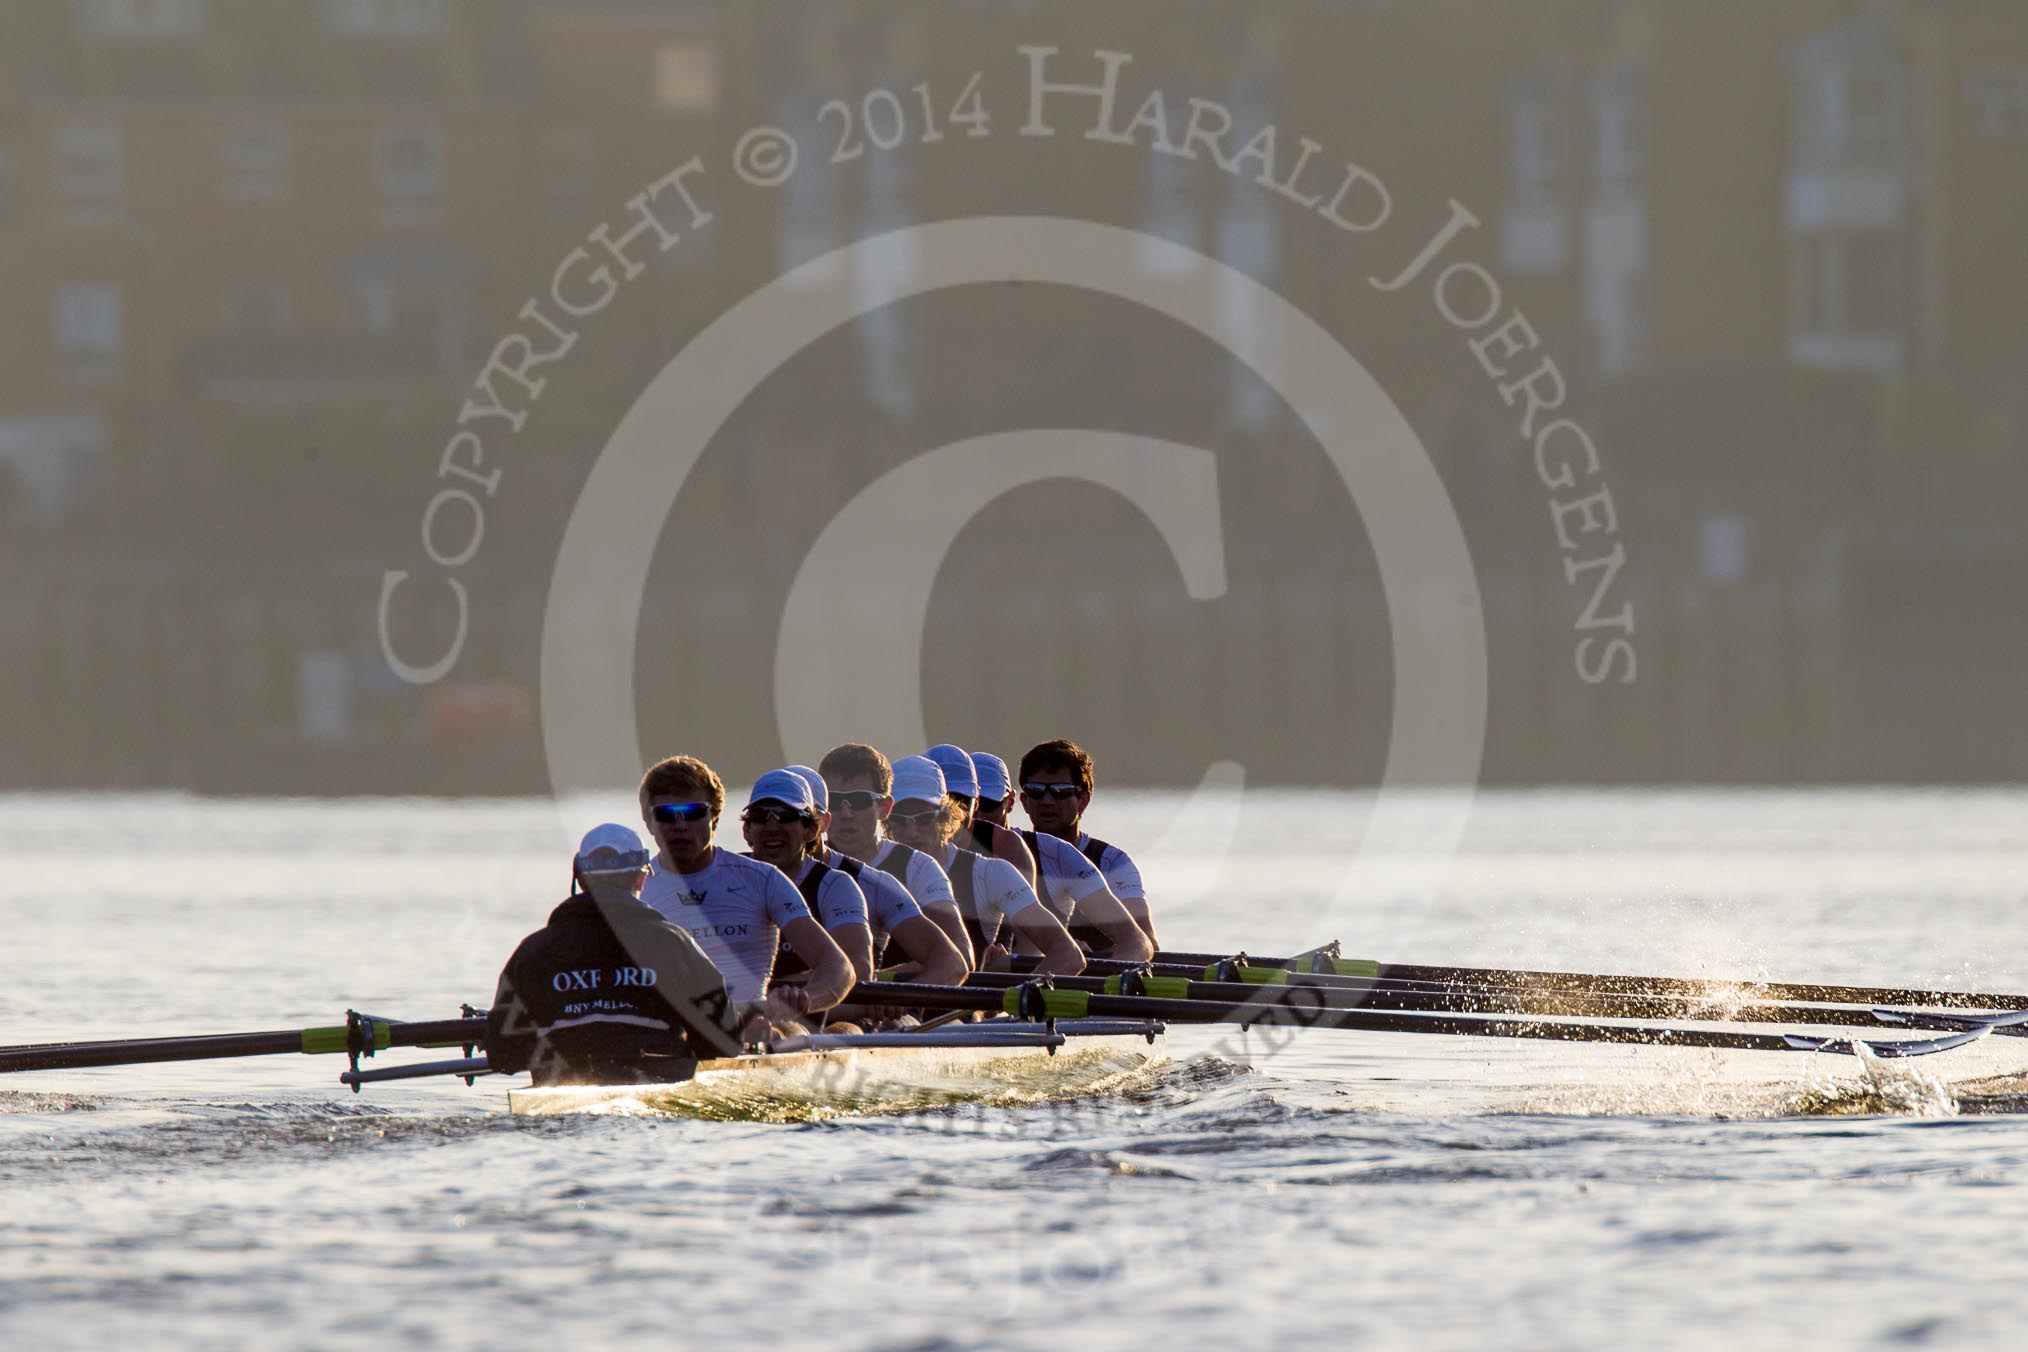 The Boat Race season 2014 - fixture OUBC vs German U23: The OUBC boat in the low evening sun..
River Thames between Putney Bridge and Chiswick Bridge,



on 08 March 2014 at 16:56, image #150